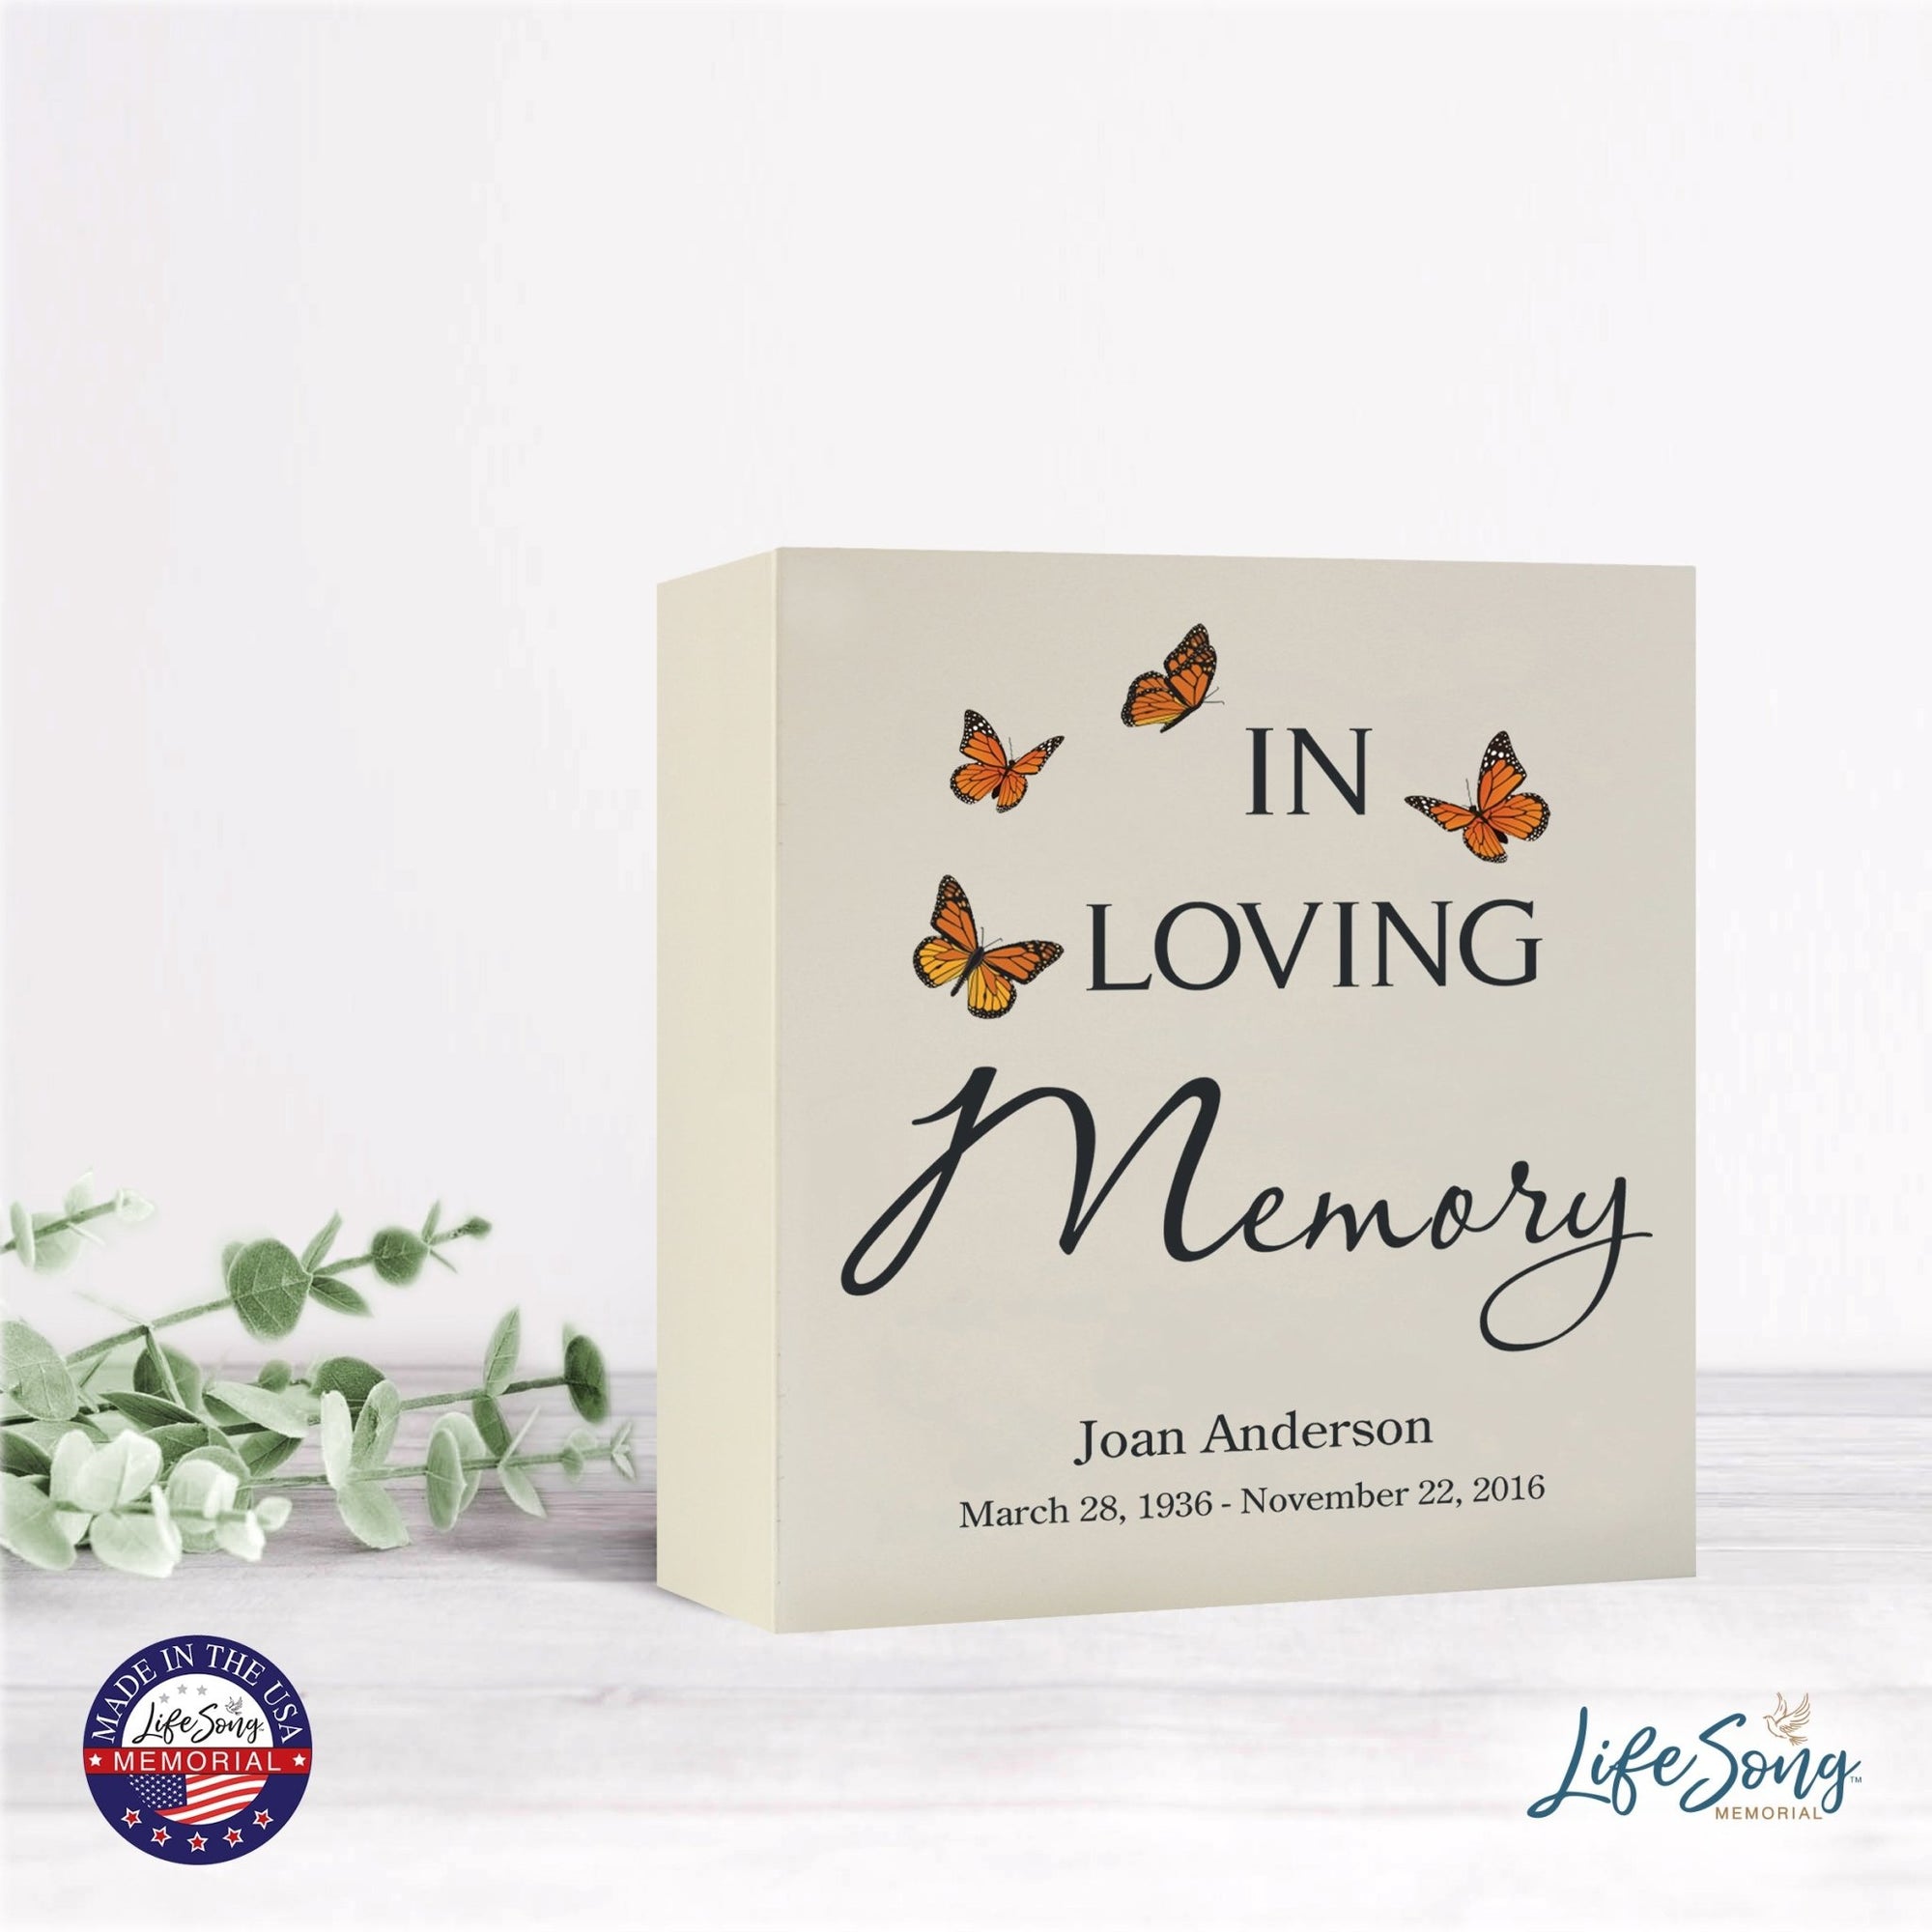 Custom Engraved Memorial Keepsake Wooden Cremation Shadow Box and Urn 10x10in Holds 189 Cu Inches Of Human Ashes In Loving Memory - LifeSong Milestones